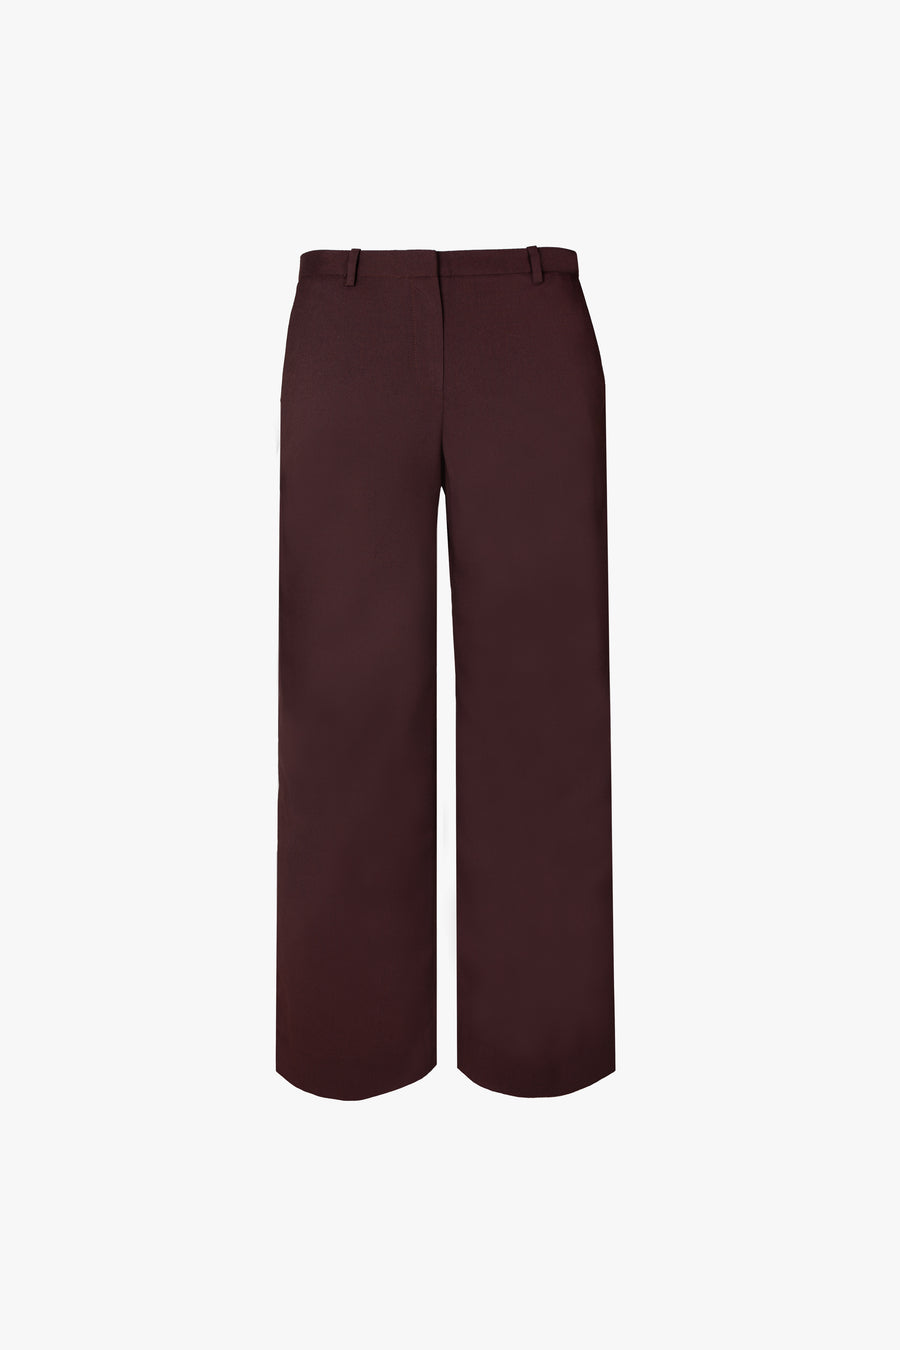 ANDES PANT IN WALNUT